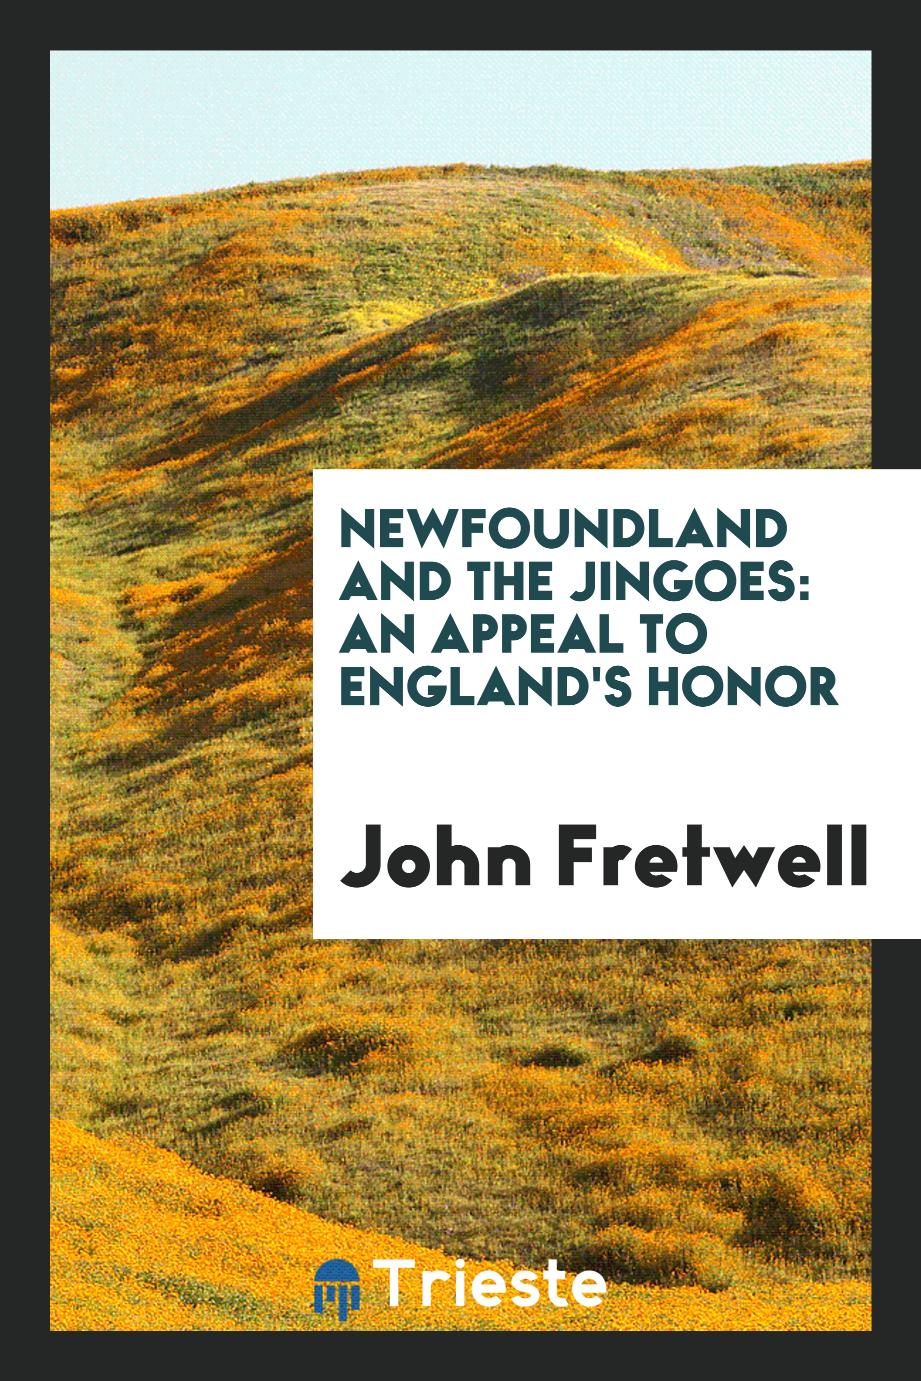 Newfoundland and the Jingoes: An Appeal to England's Honor